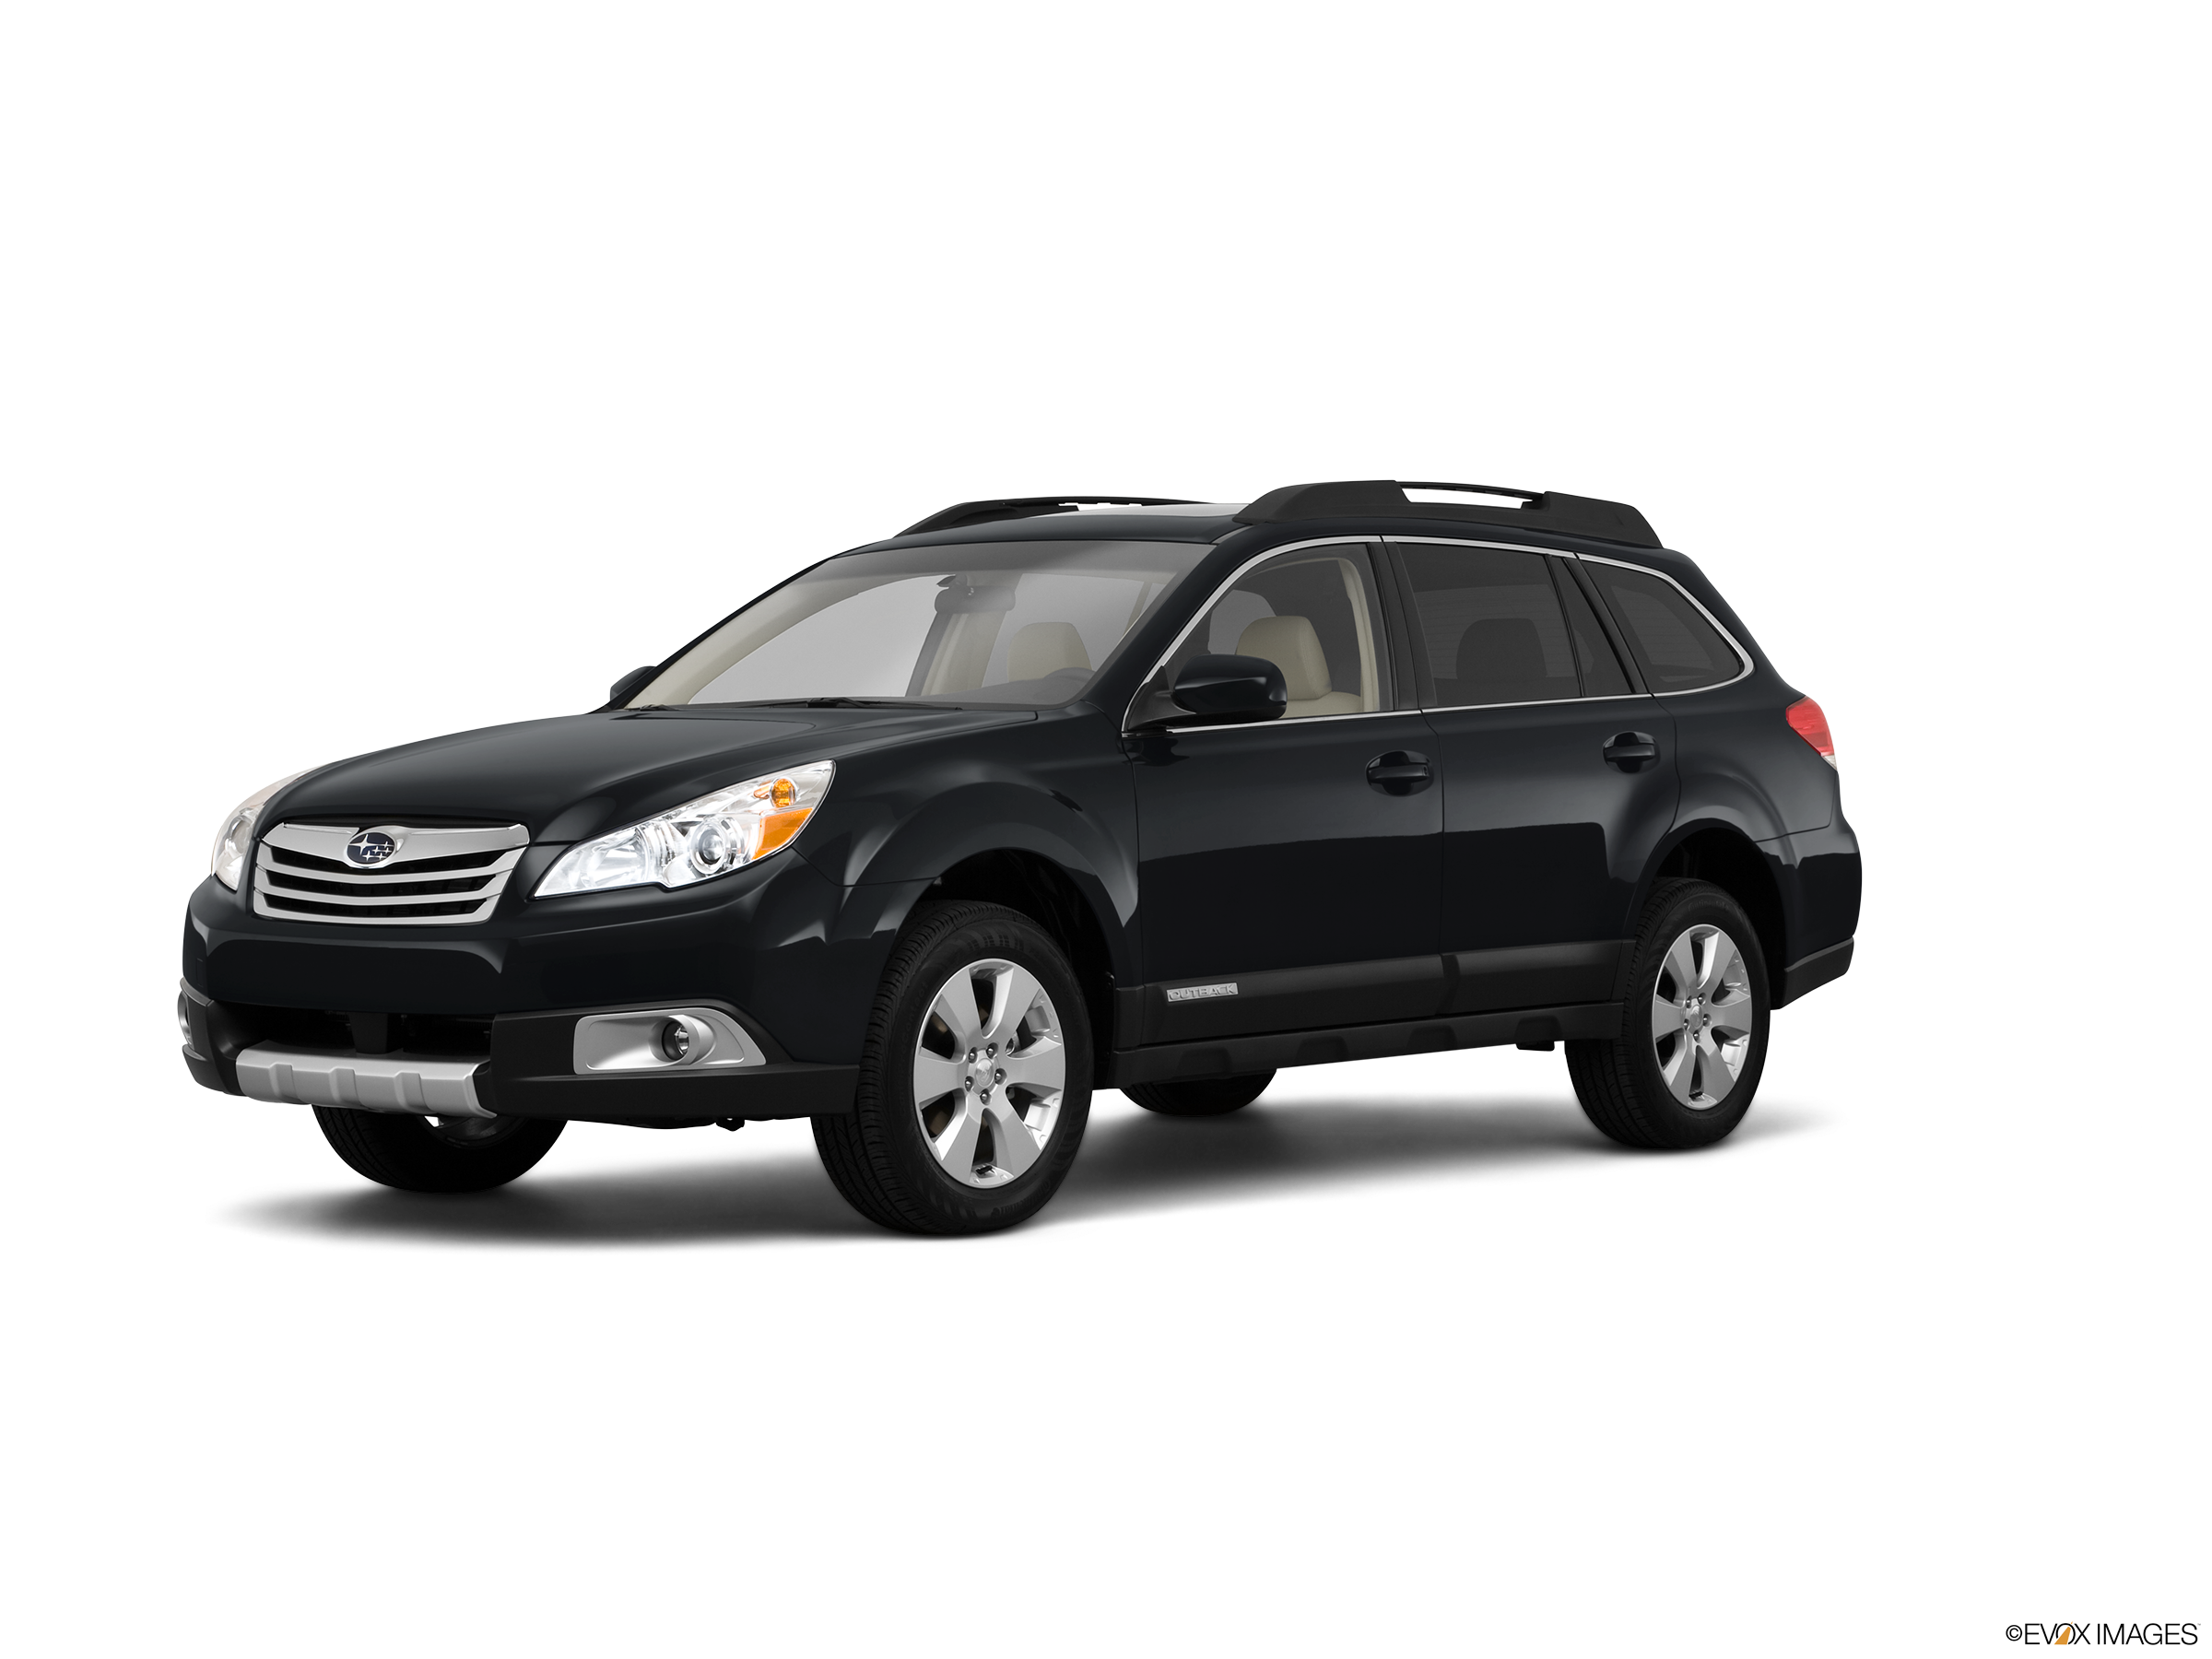 Used 2010 Subaru Outback 2.5i Limited Wagon 4D Pricing